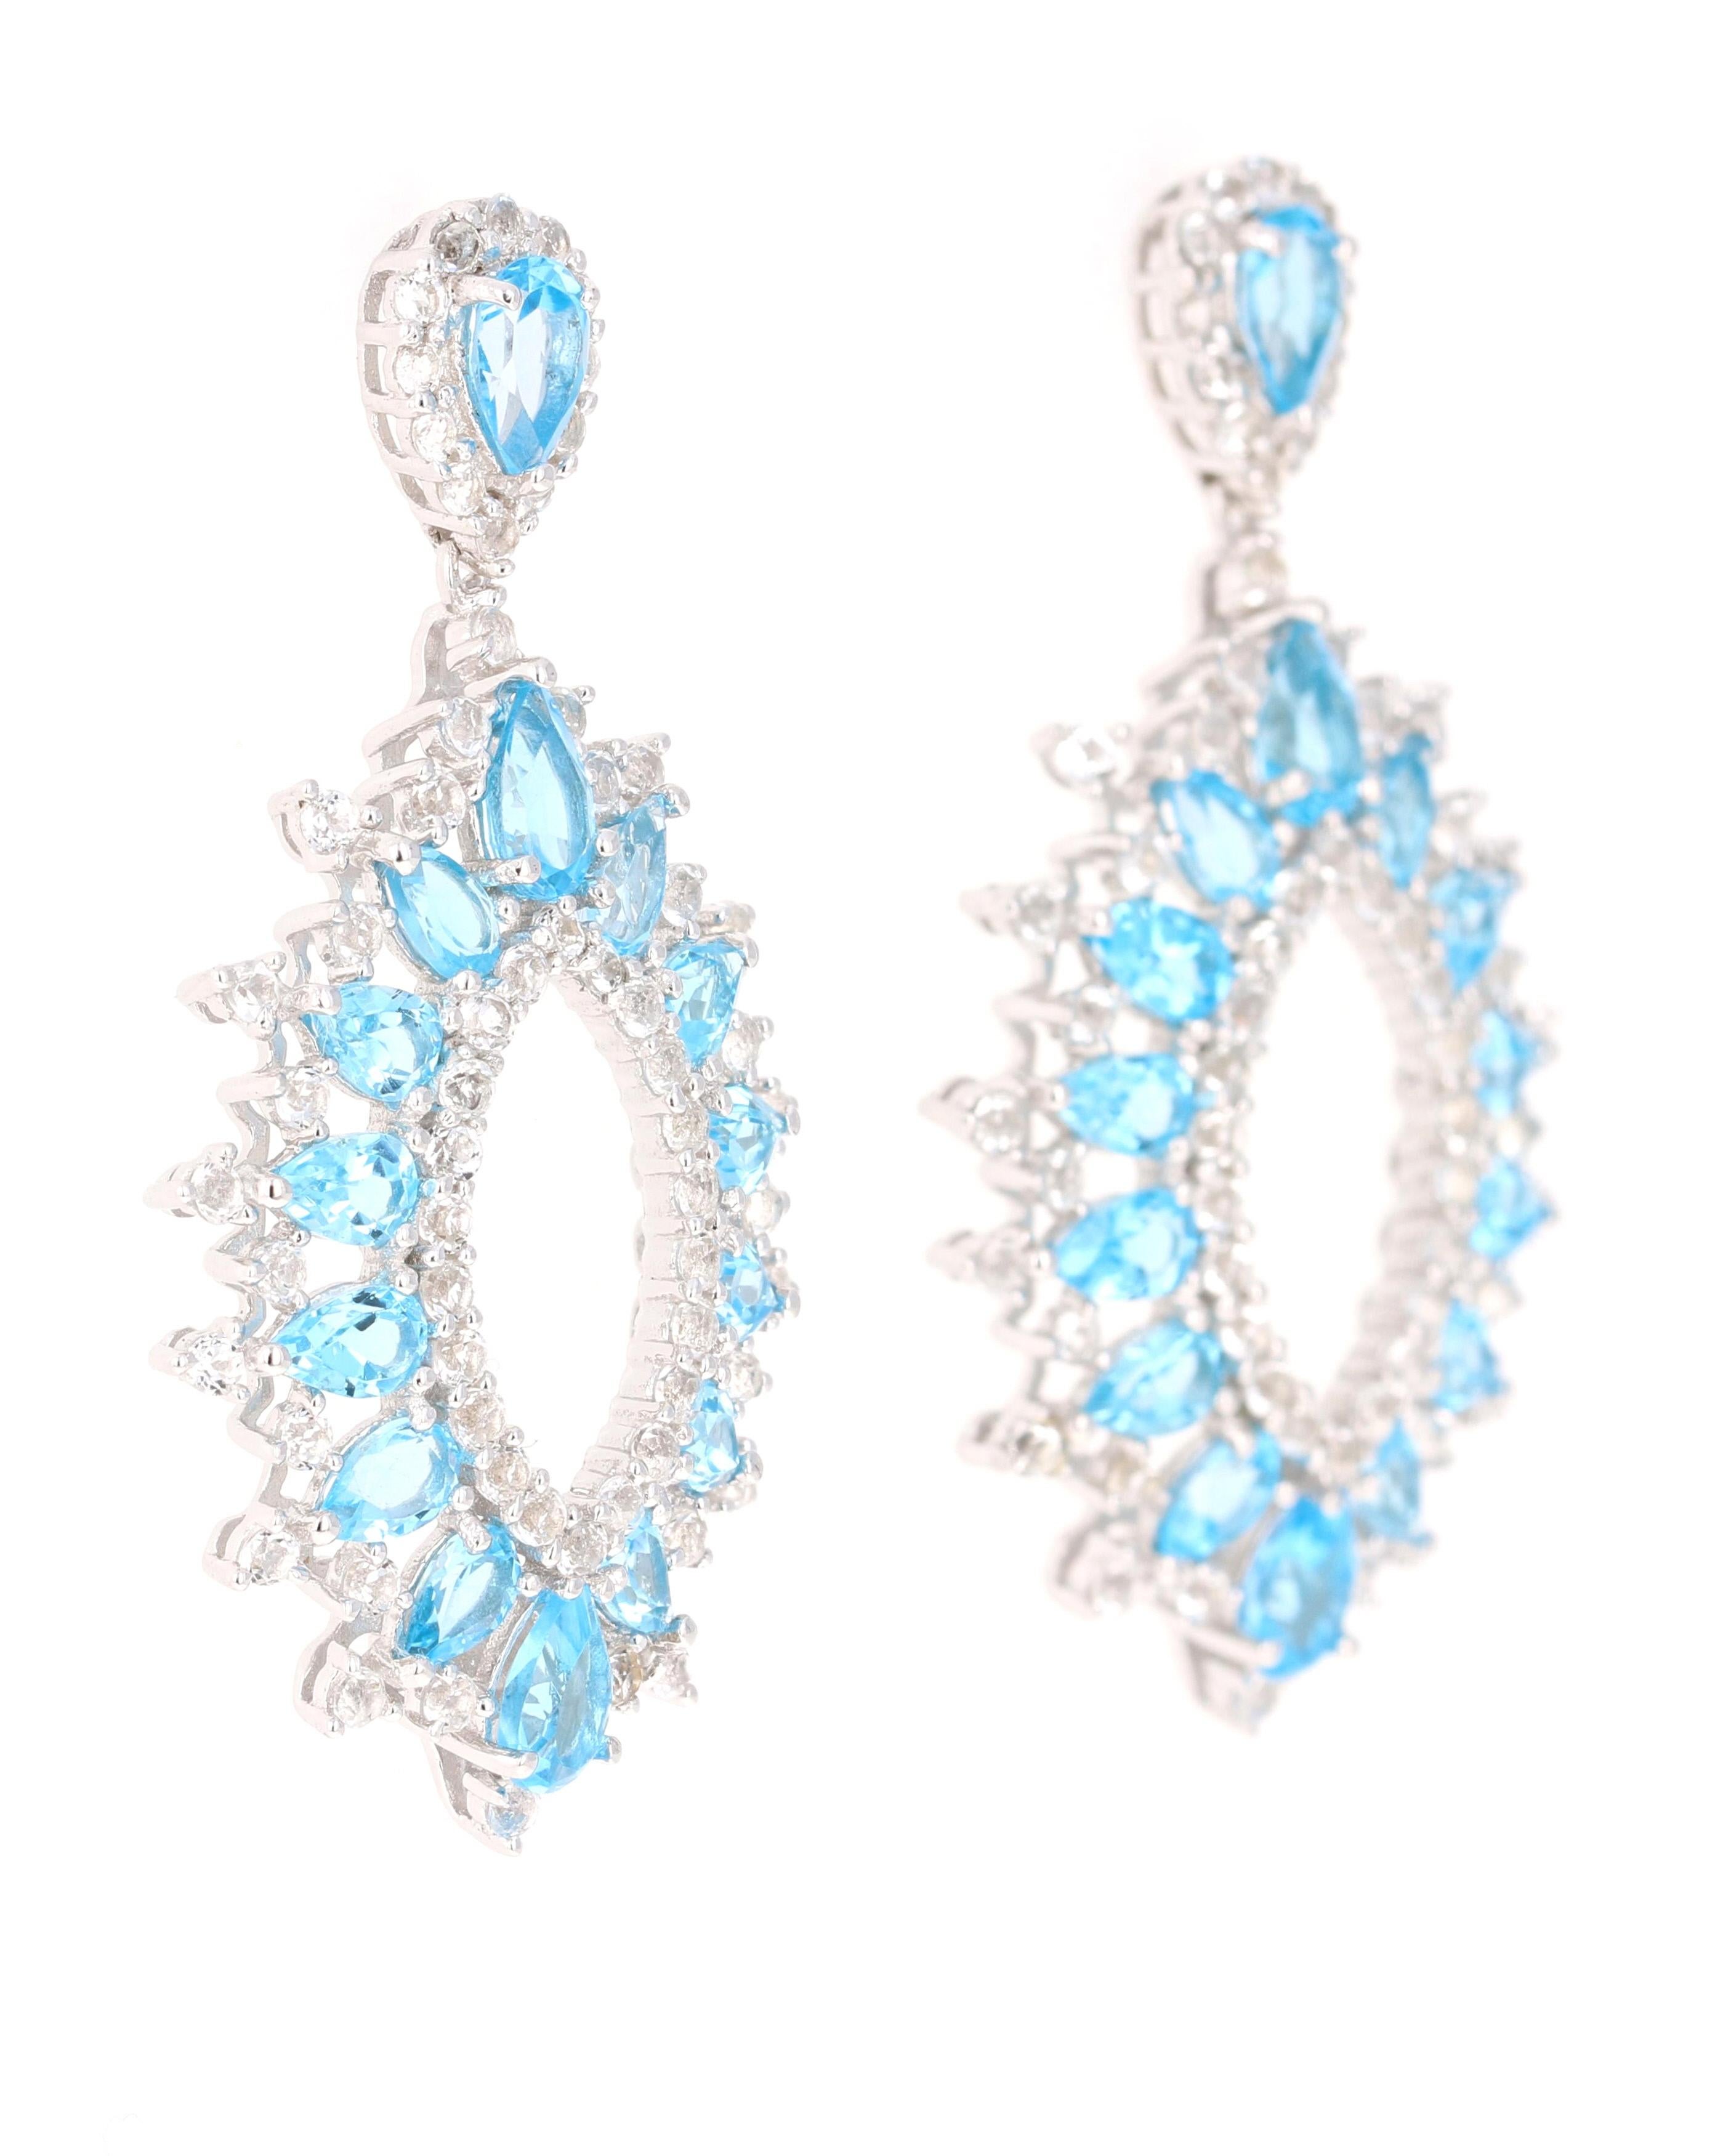 Stunning Dangle Earrings 

These earrings have 7.60 Carats of Blue Topaz and White Topaz.

They are beautifully curated in 925 Silver weighing approximately 11.6 grams 

They are 1.75 inches long. 
